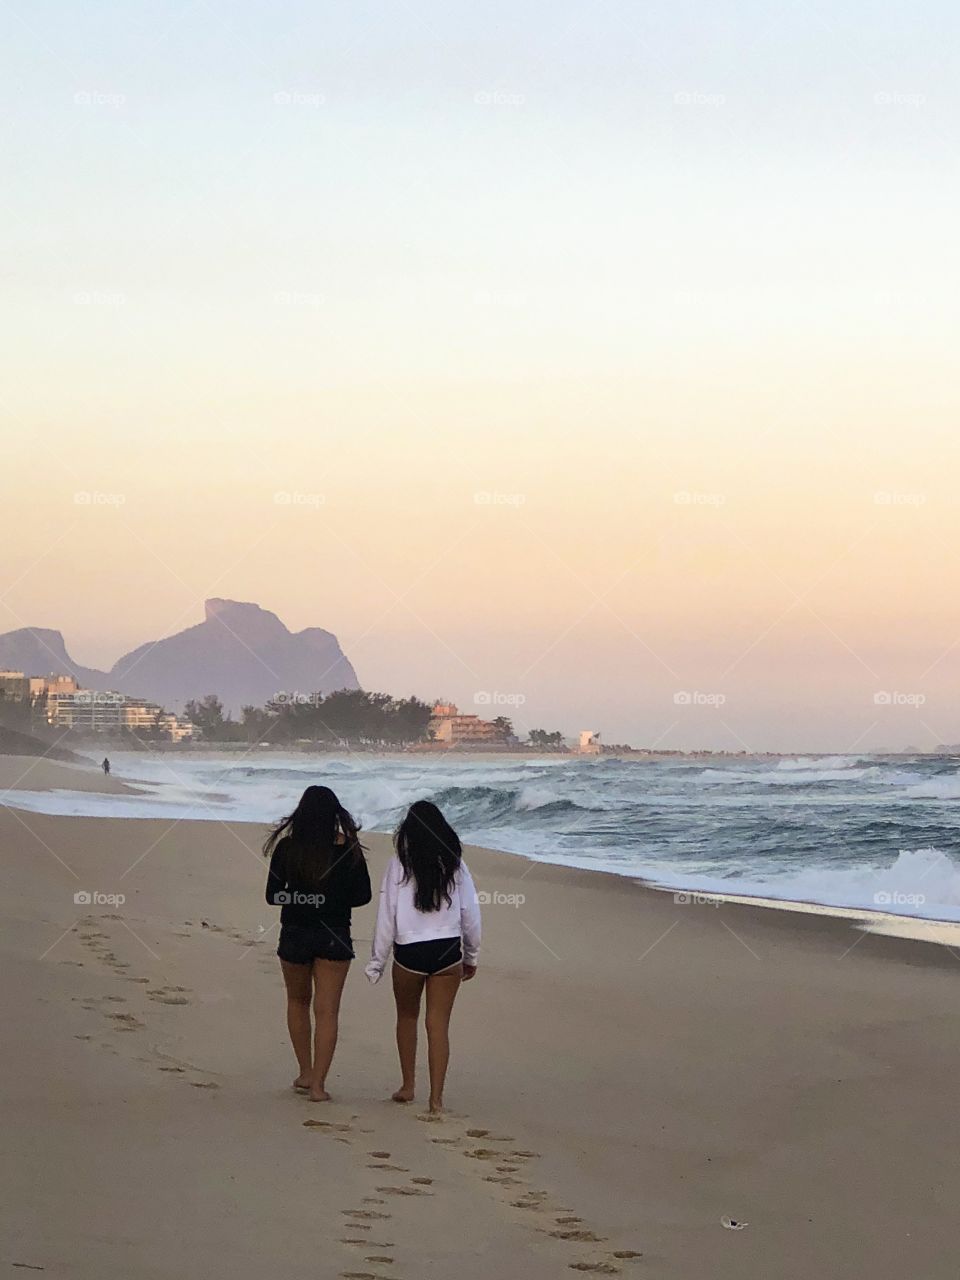 Two girls walking on the sand of a beach with beautiful view on a colorful sunset